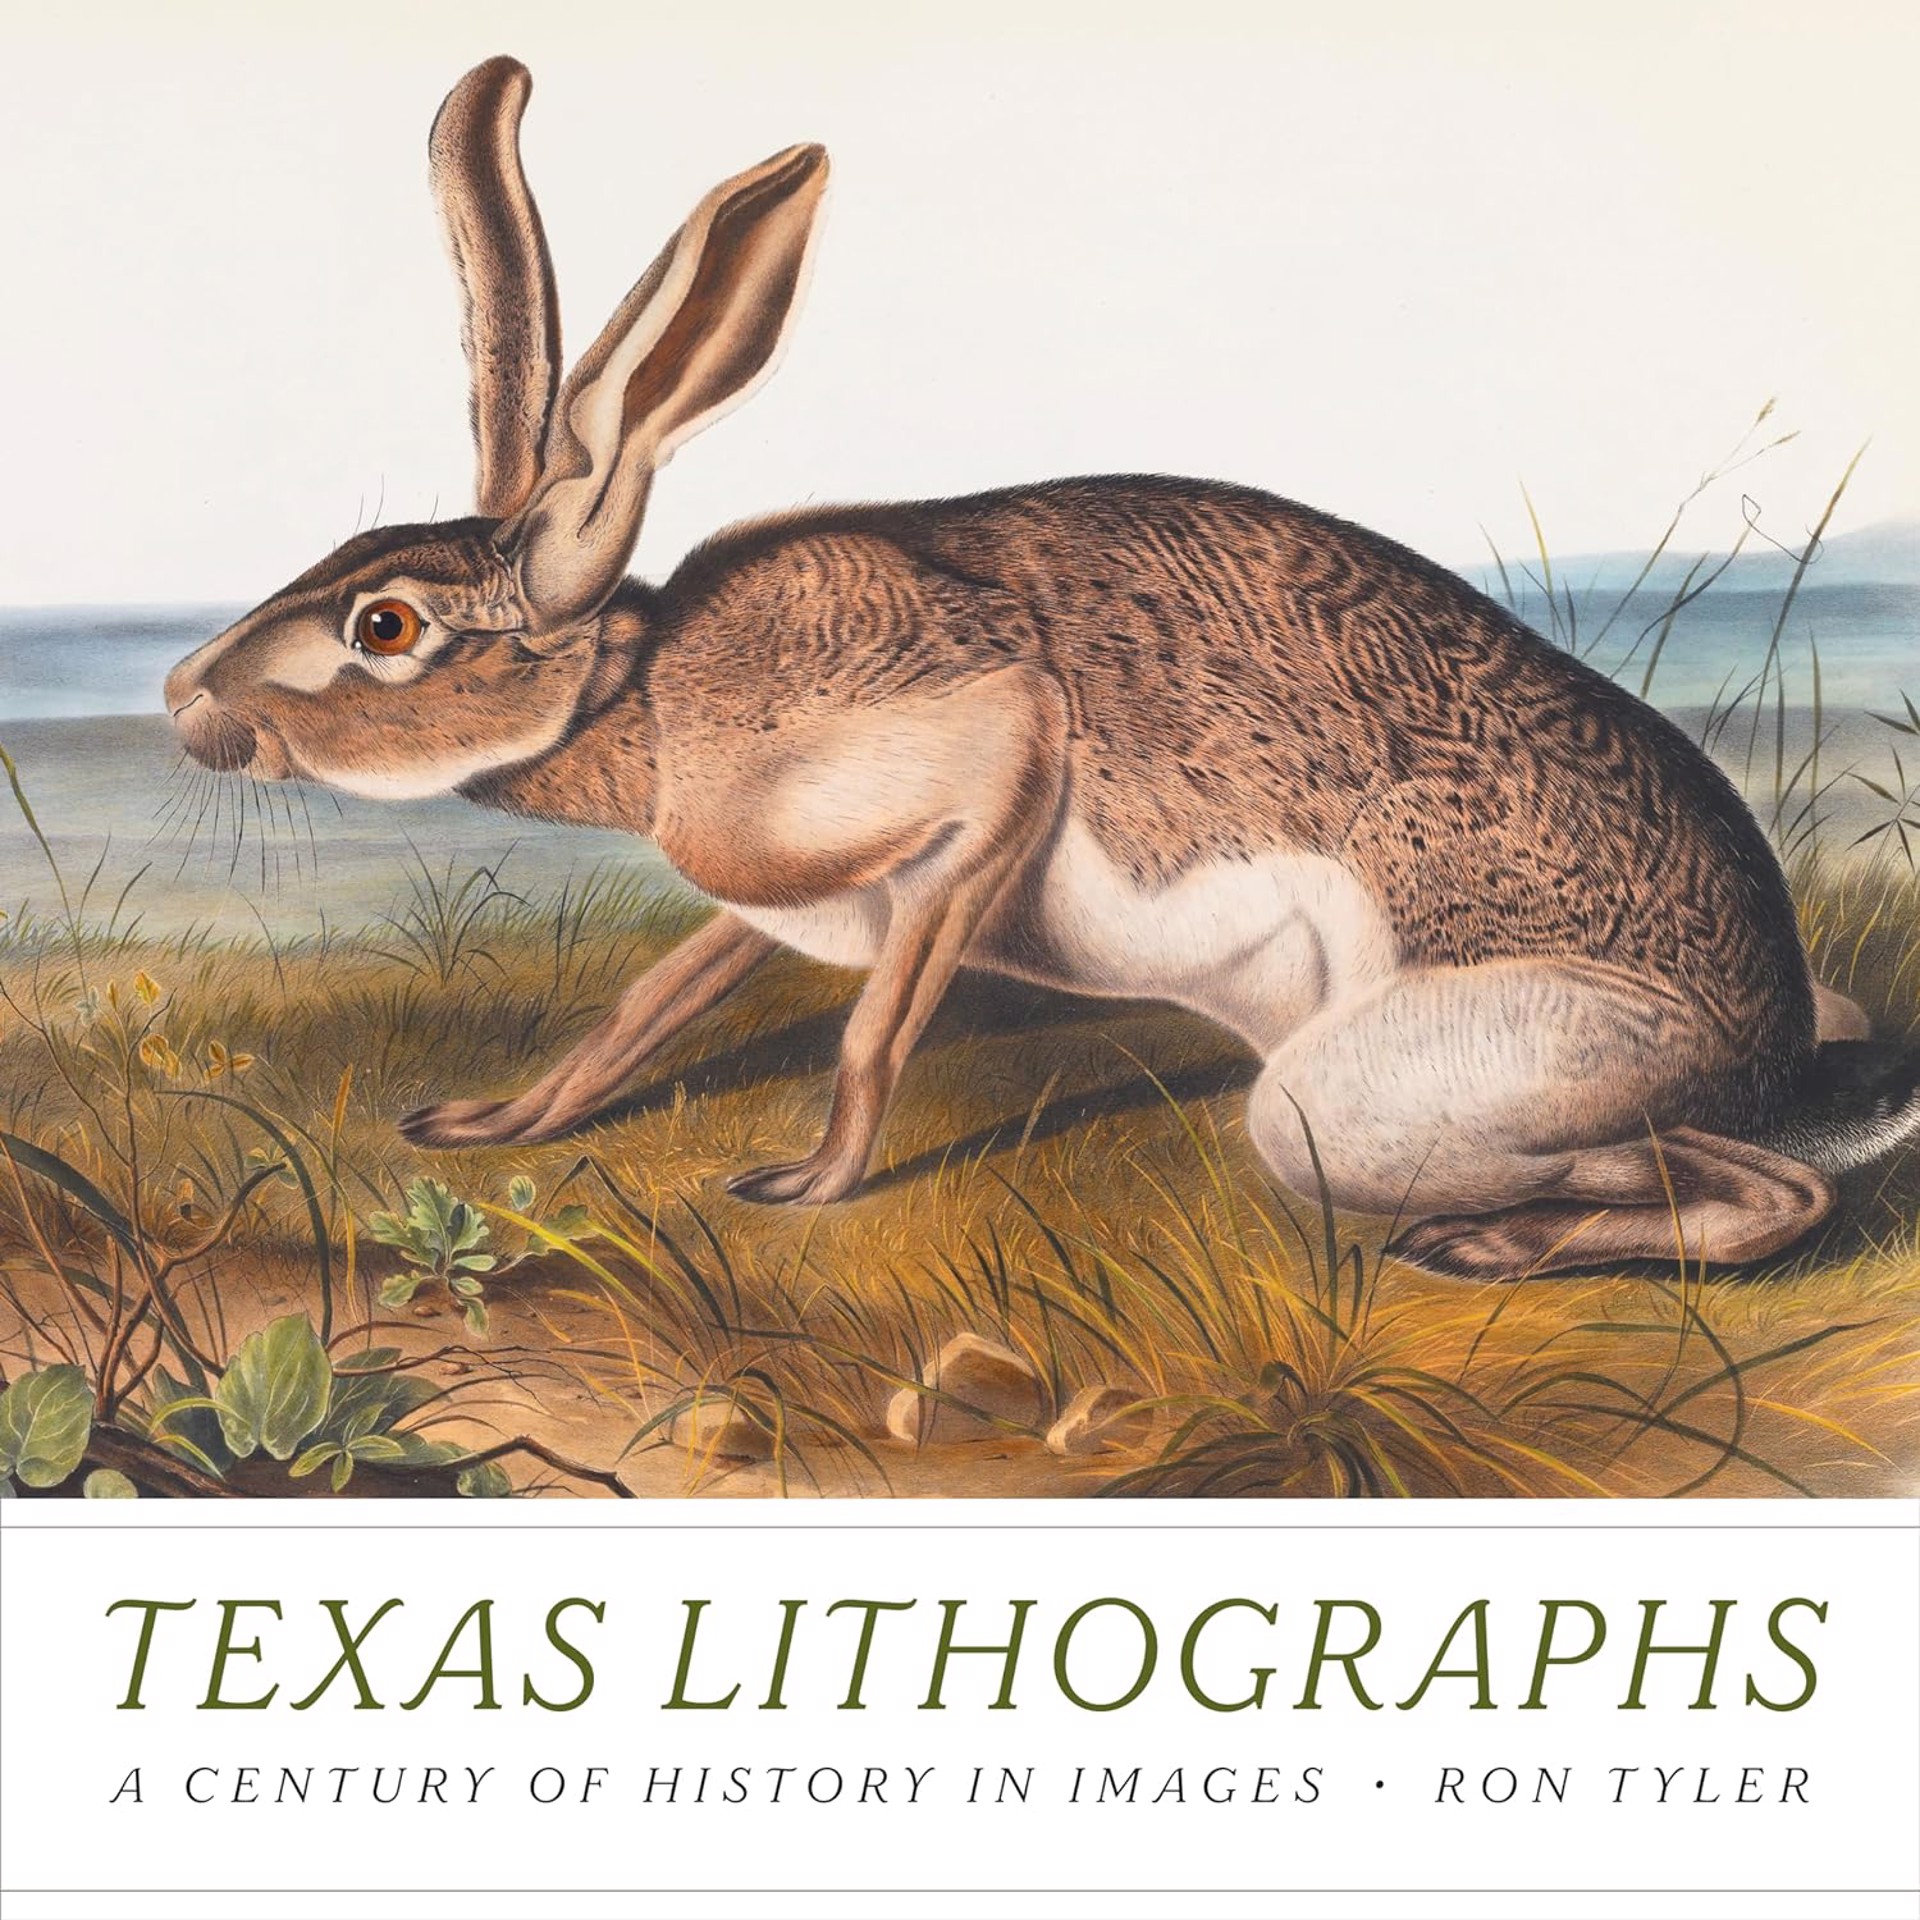 Texas Lithographs: A Century of History in Images, Ron Tyler by Publications